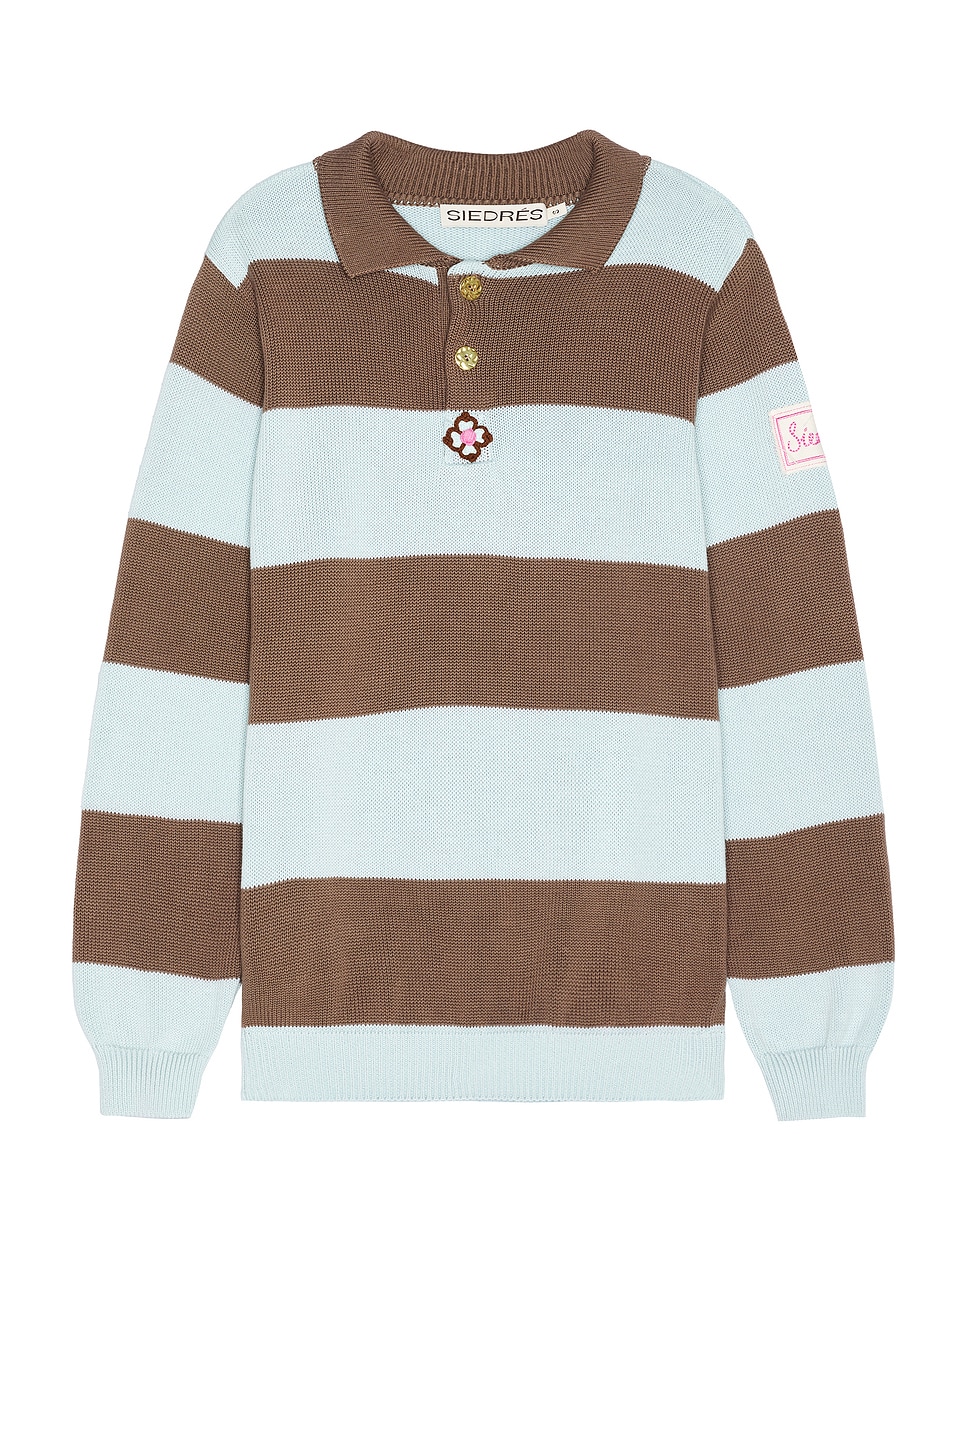 Image 1 of SIEDRES Ole Flower Crochet Detailed Striped Polo Sweater in Brown